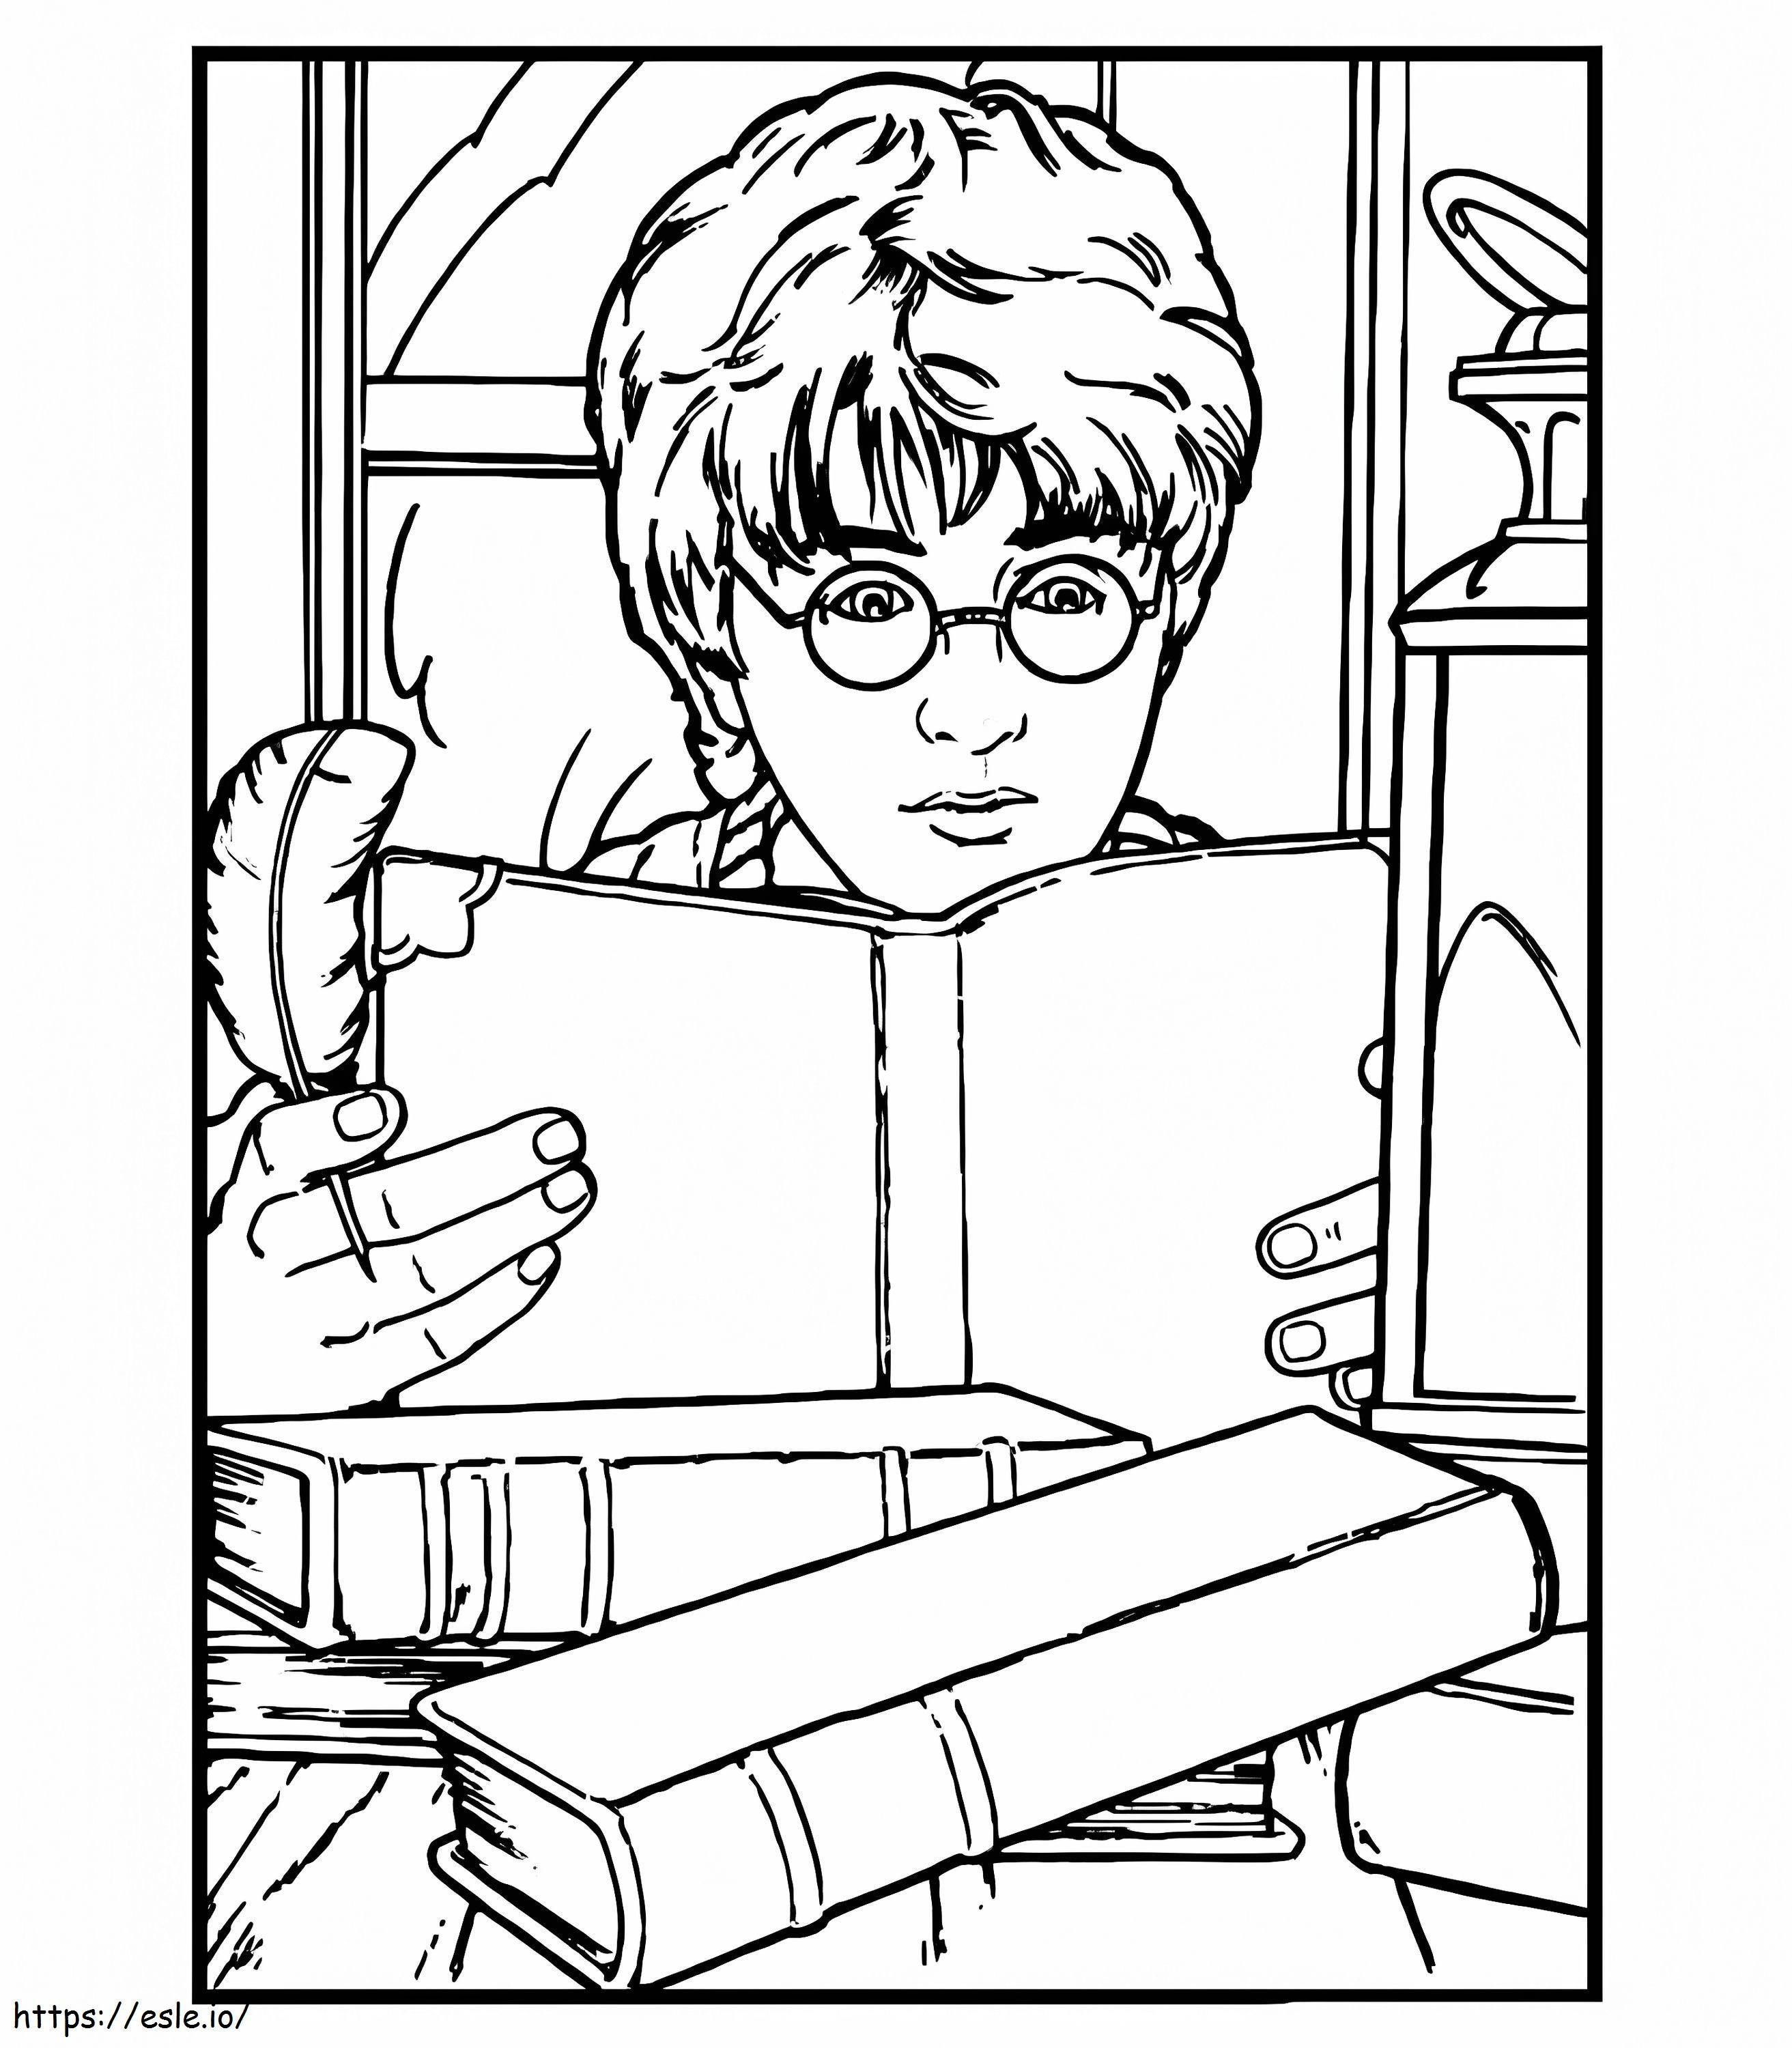 Harry Potter 5 coloring page